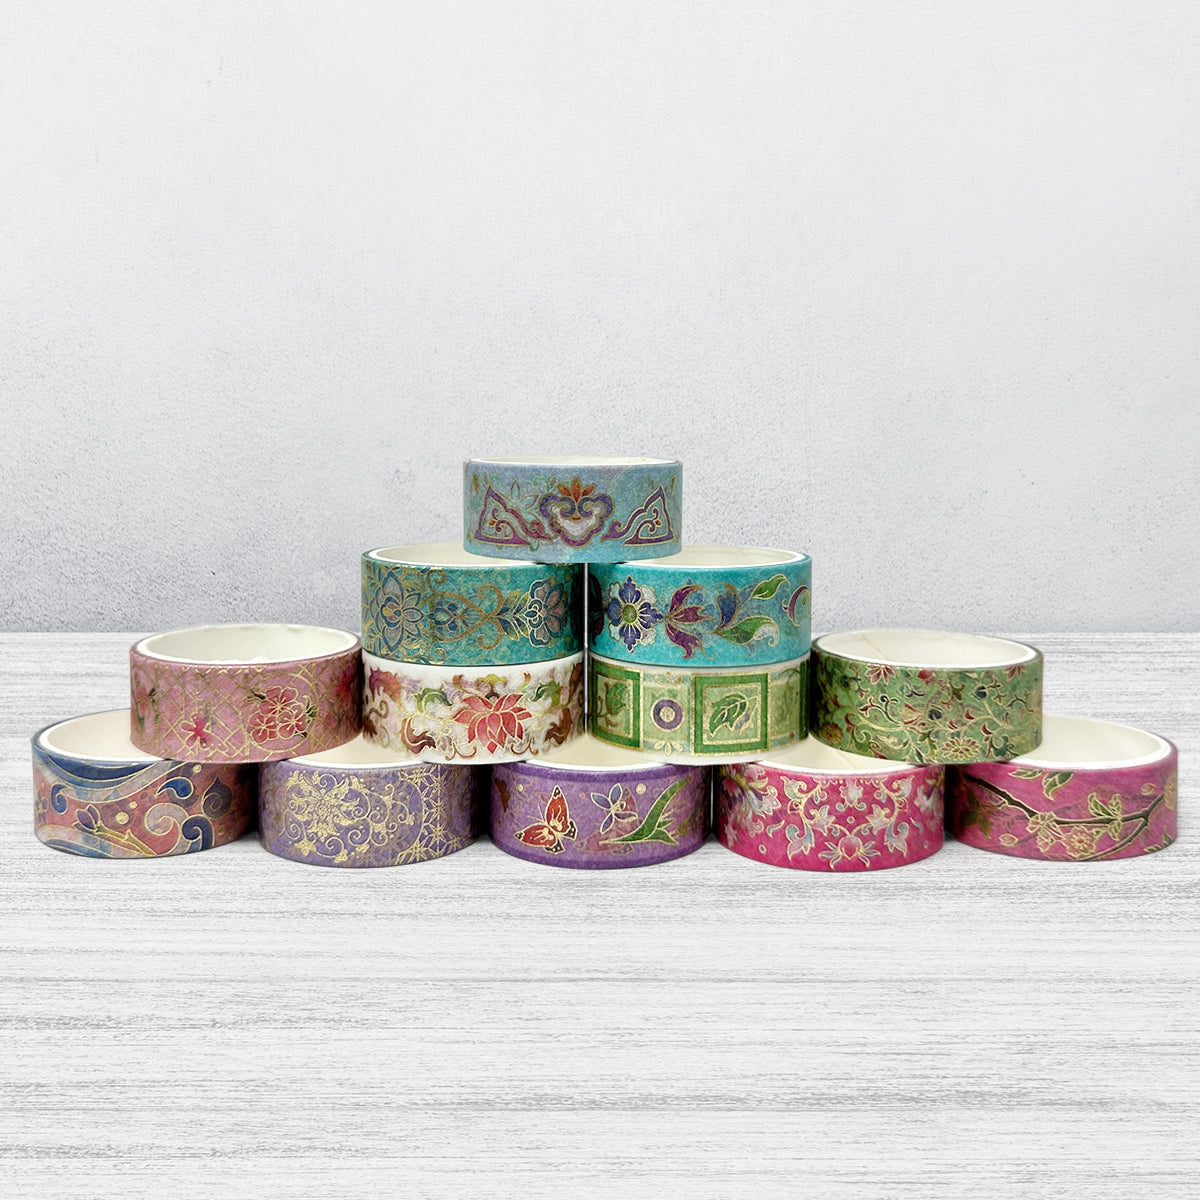 Wrapables Elegant Gold Foil Washi Tape Box Set for Arts & Crafts, Scrapbooking, Stationery, Diary (12 Rolls)